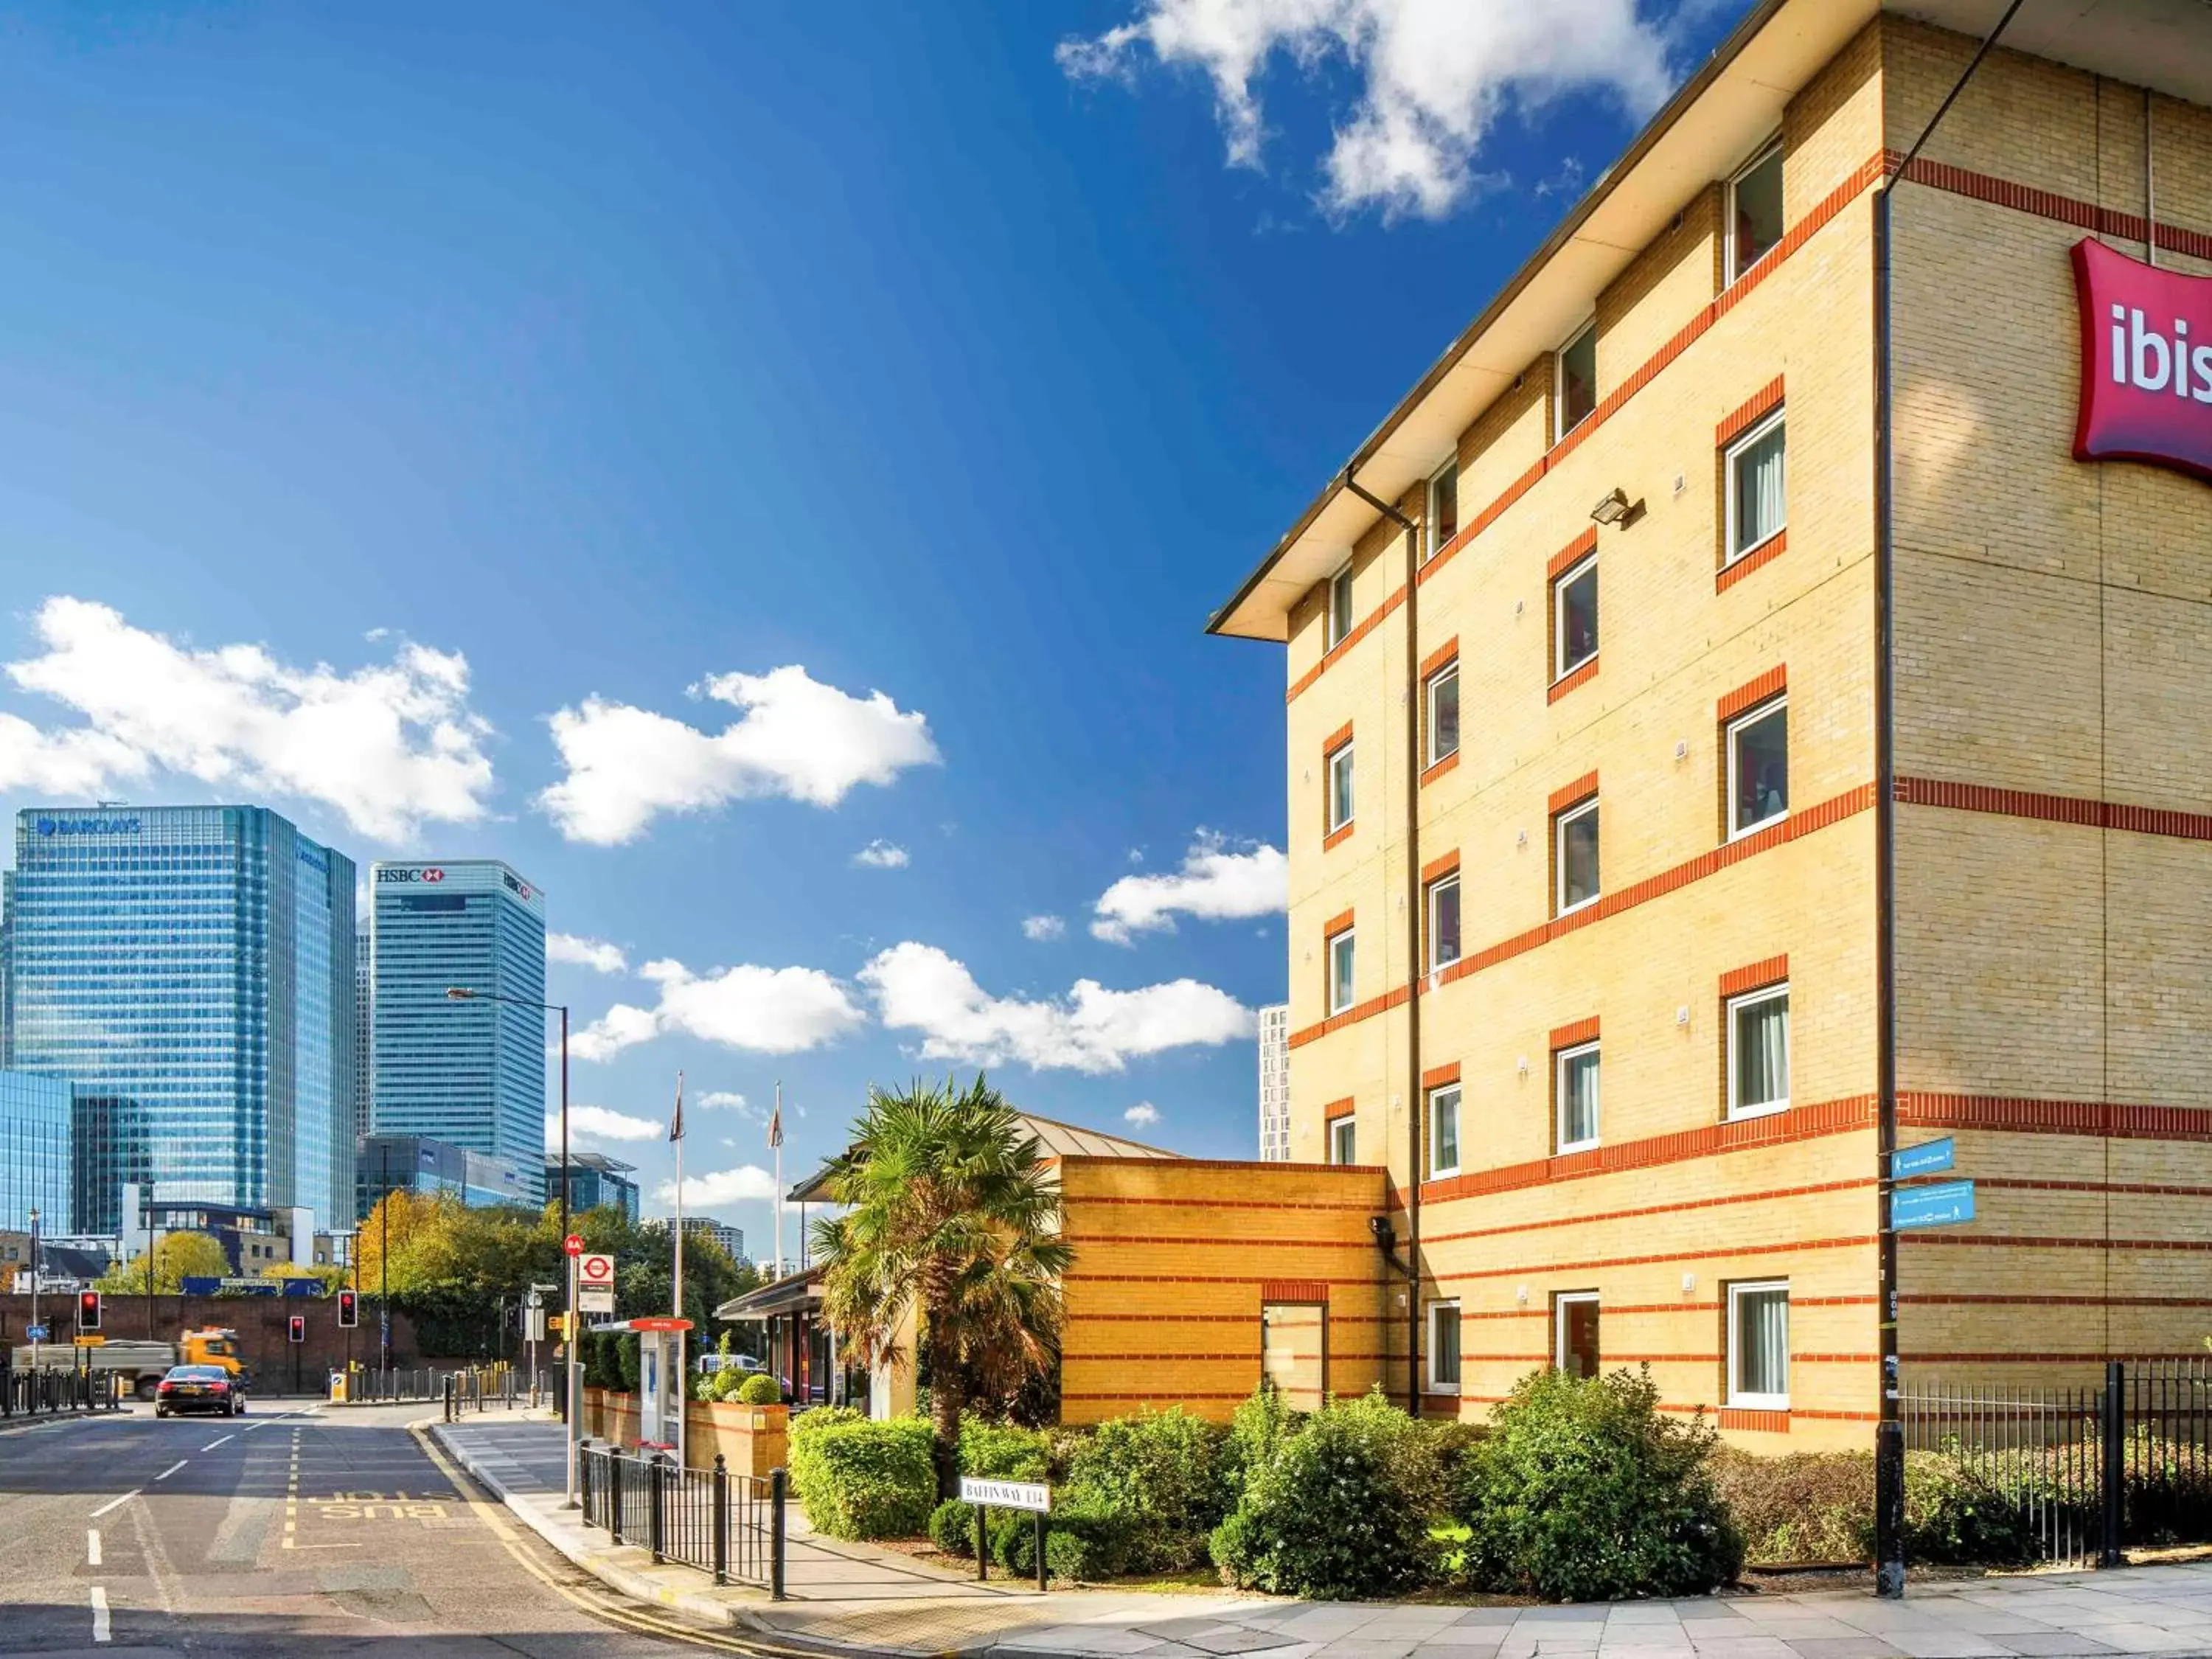 Property building in ibis London Docklands Canary Wharf